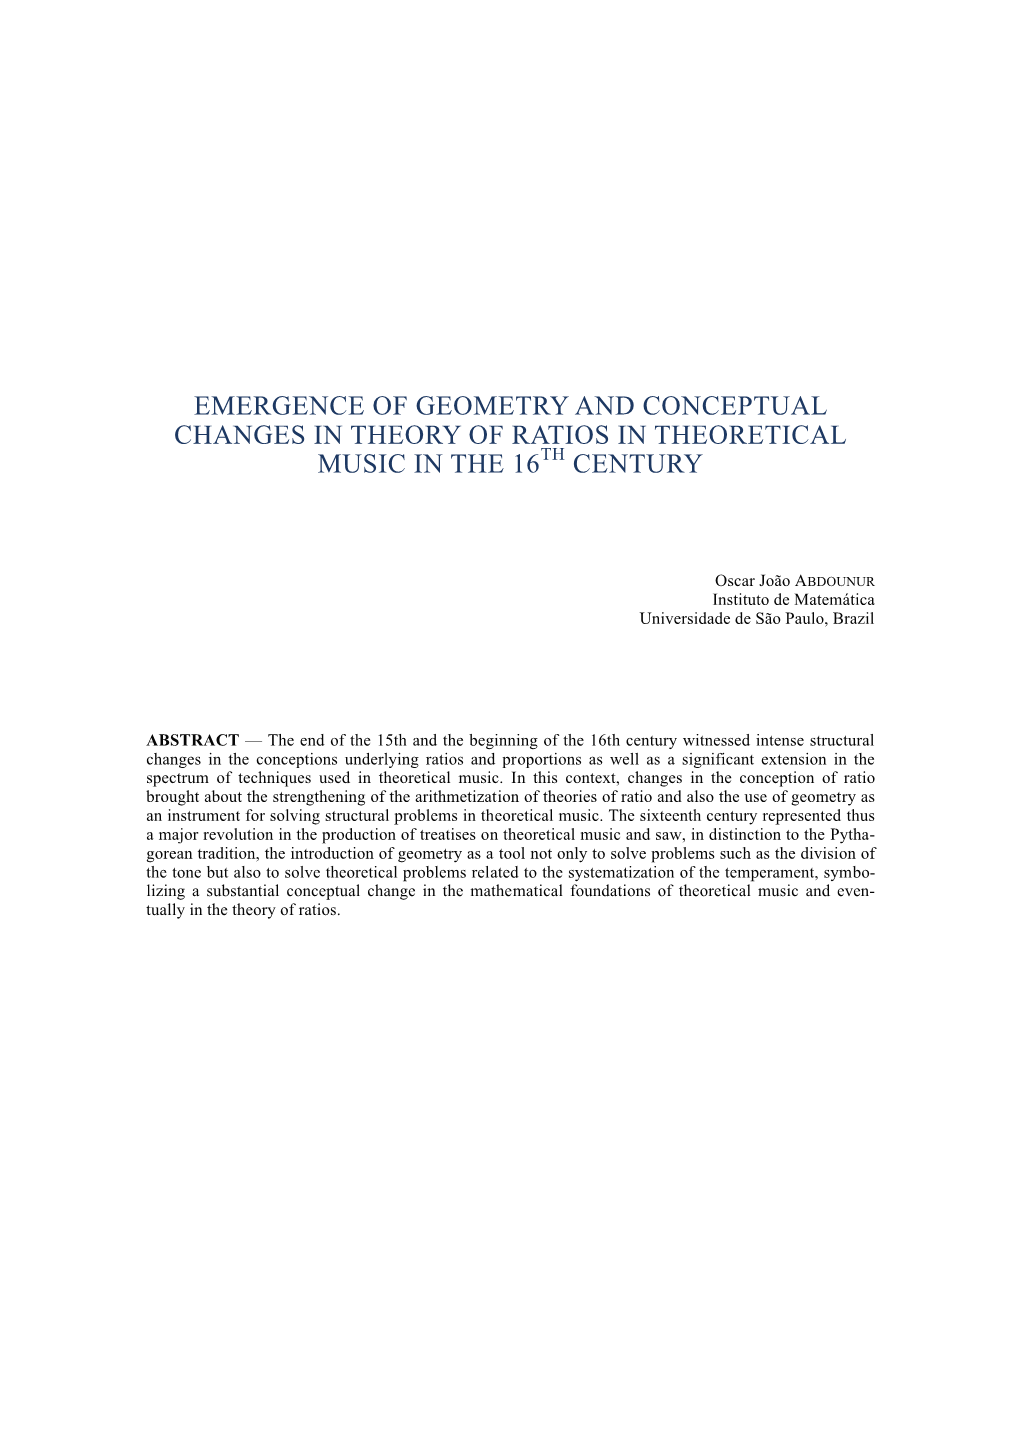 Emergence of Geometry and Conceptual Changes in Theory of Ratios in Theoretical Music in the 16 Th Century